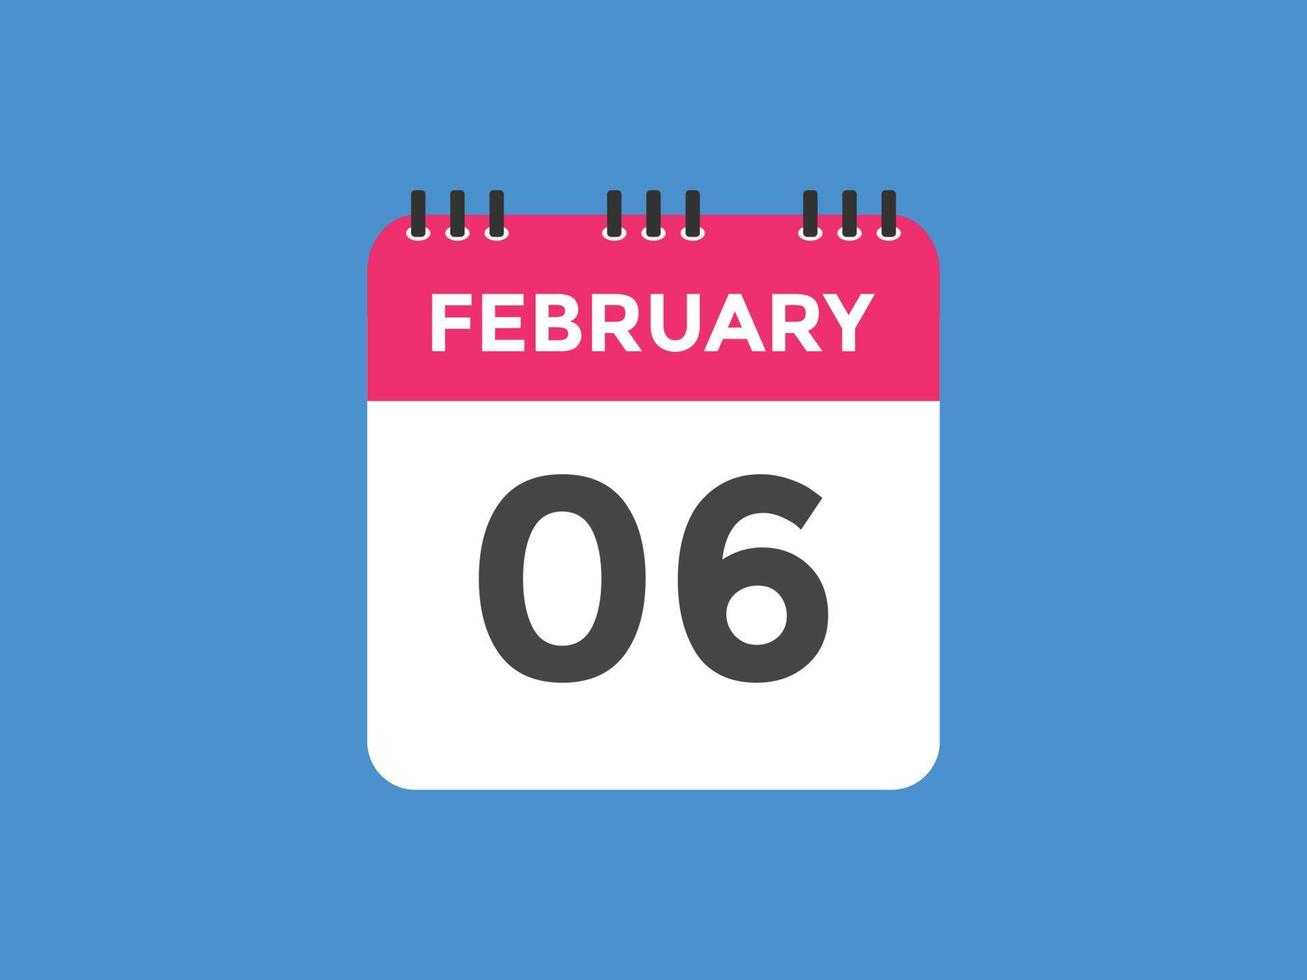 february 6 calendar reminder. 6th february daily calendar icon template. Calendar 6th february icon Design template. Vector illustration